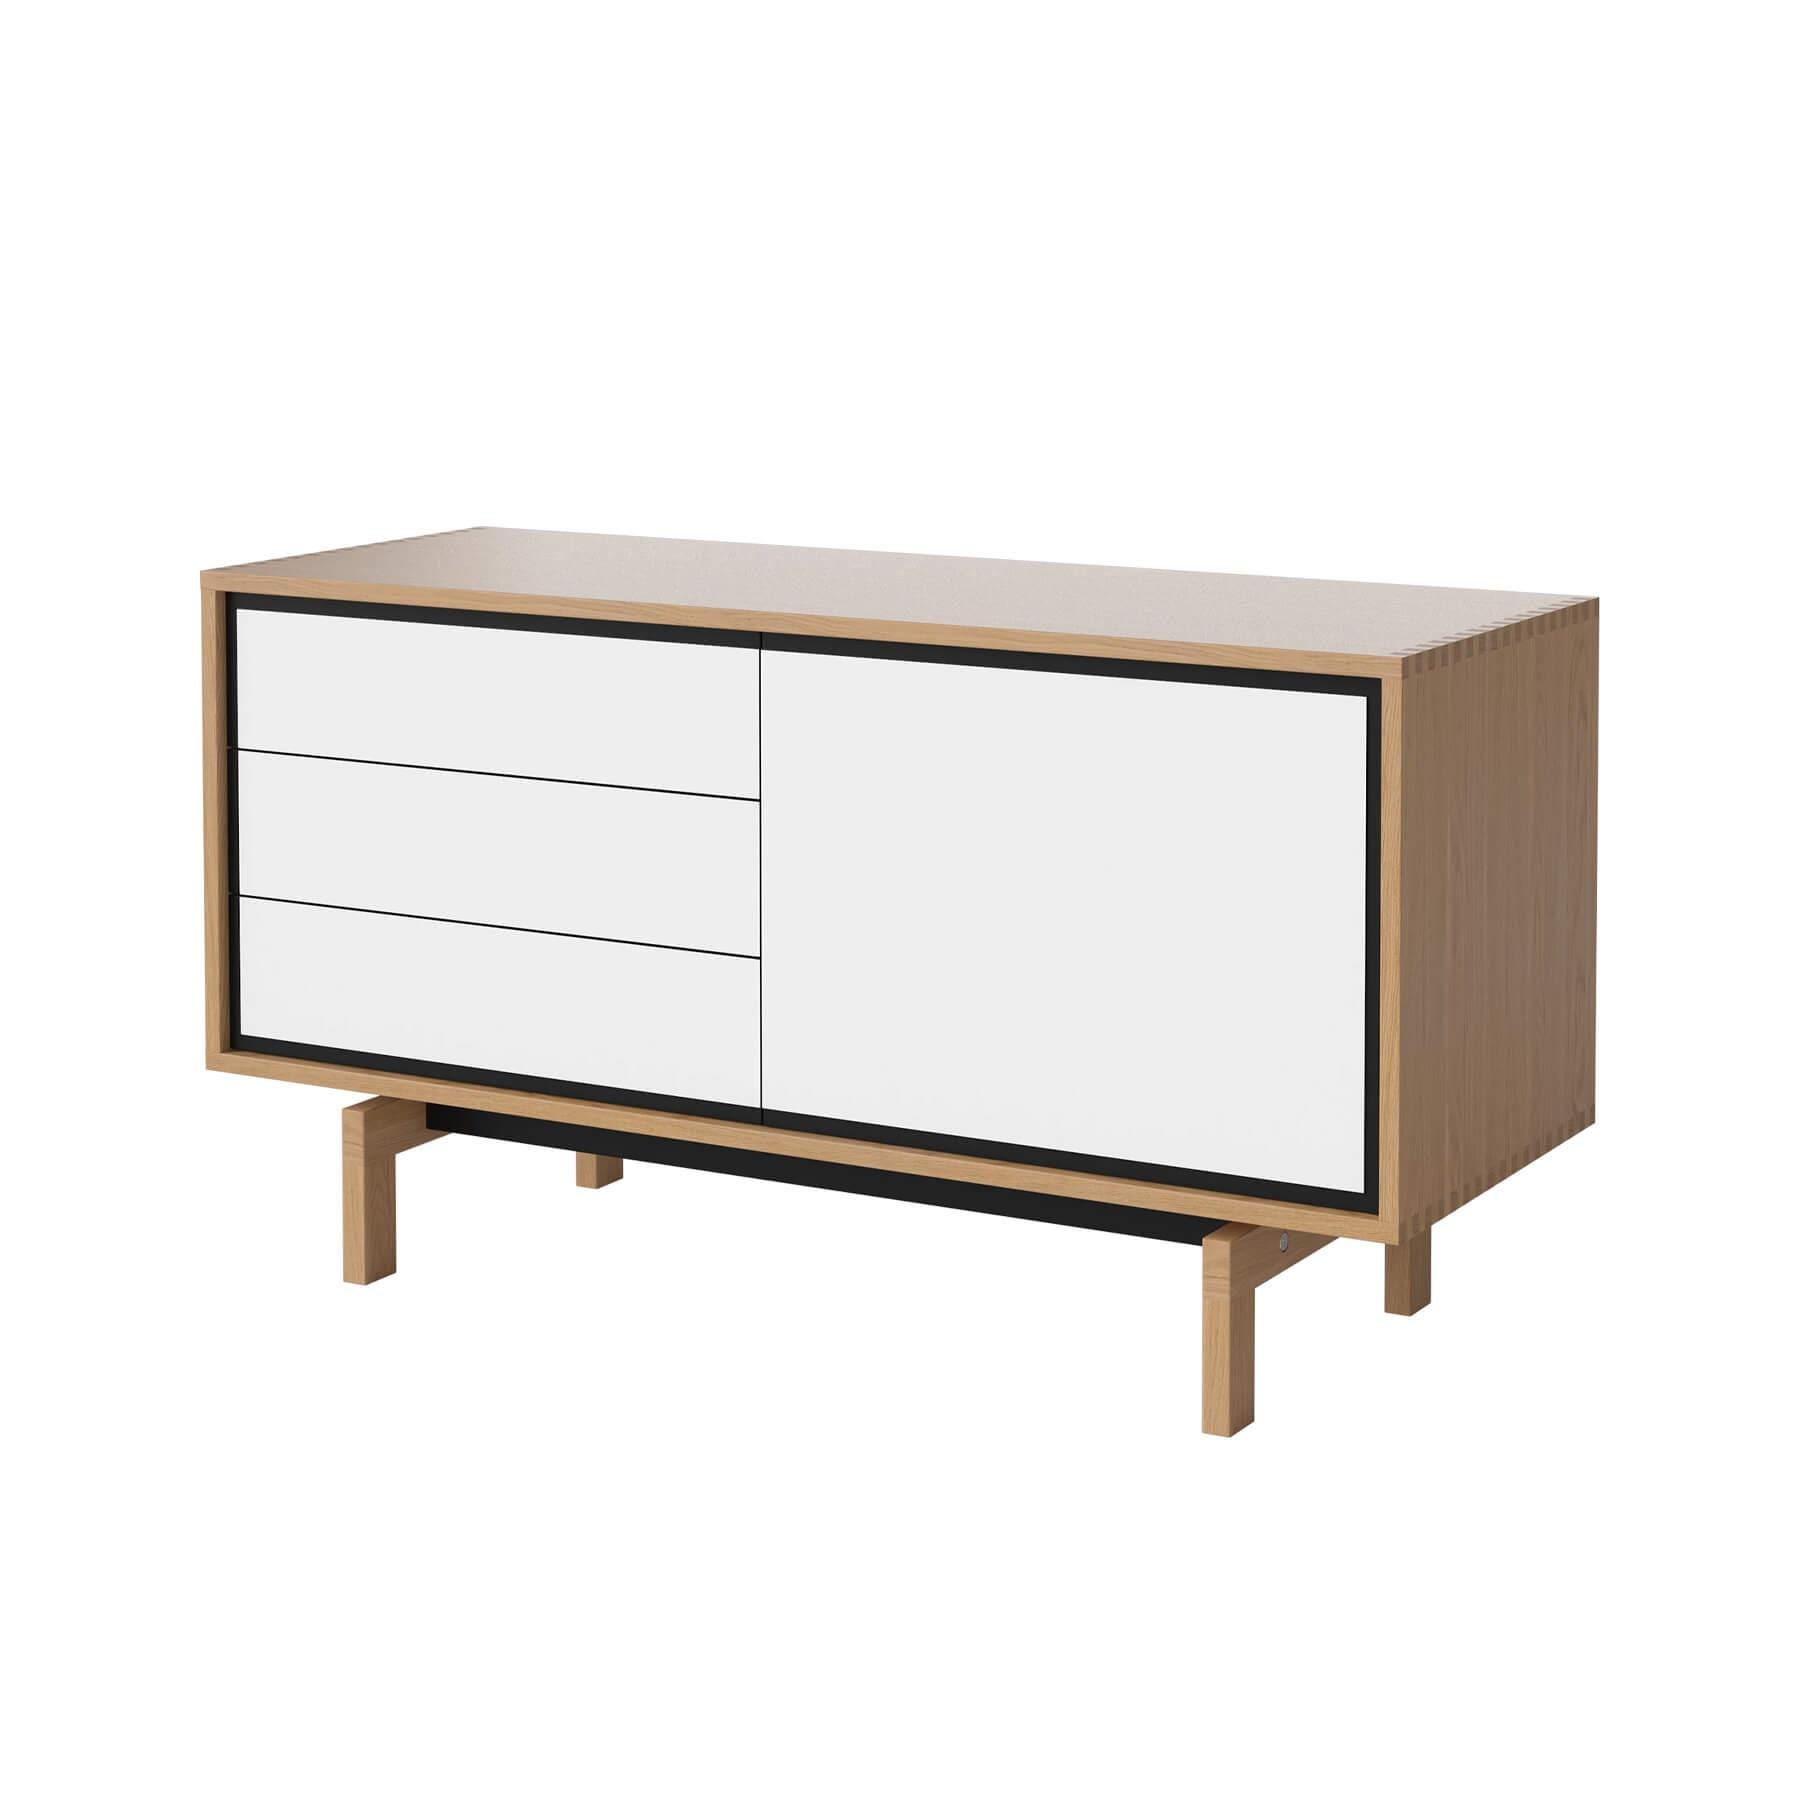 Bolia Floow Sideboard Small Oiled Oak With White Laminate Light Wood Designer Furniture From Holloways Of Ludlow